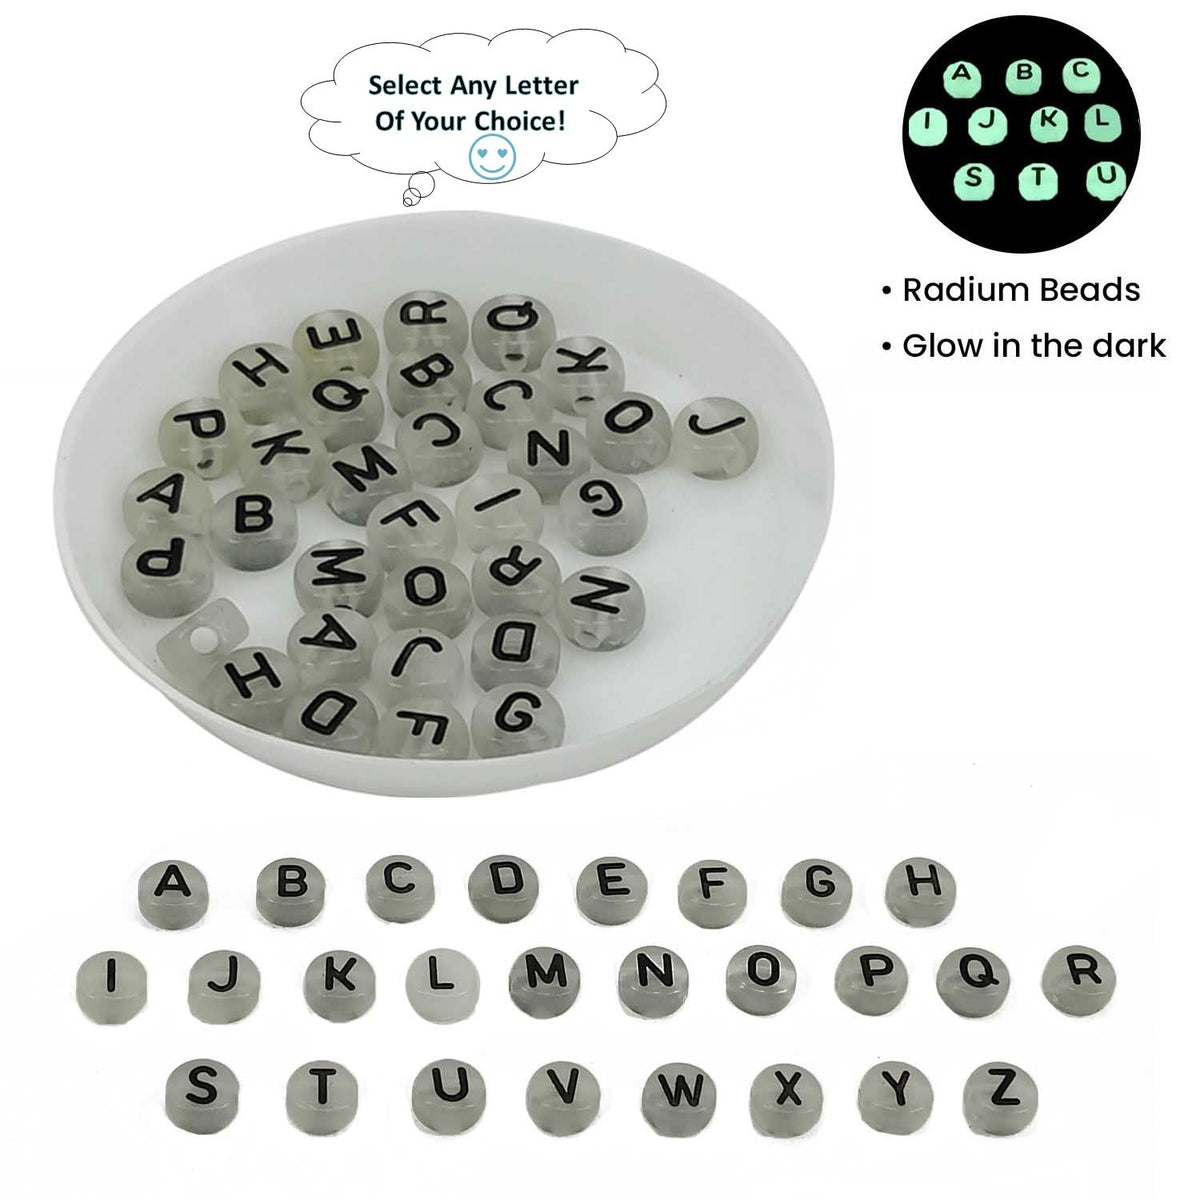 Yinkin 1000 Pieces Round Acrylic Letter Number Beads India